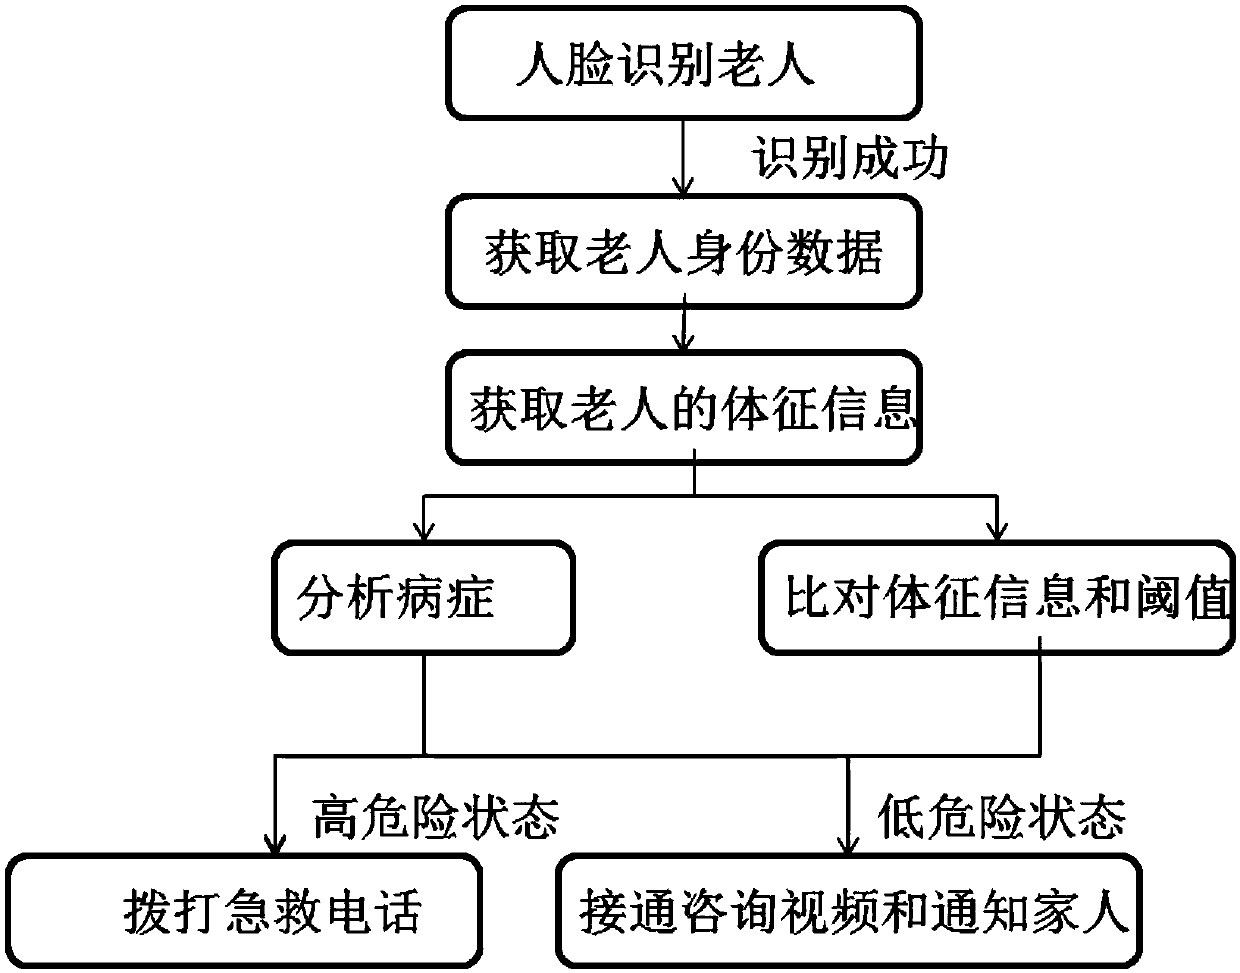 Geriatric nursing management system and method applied to robot